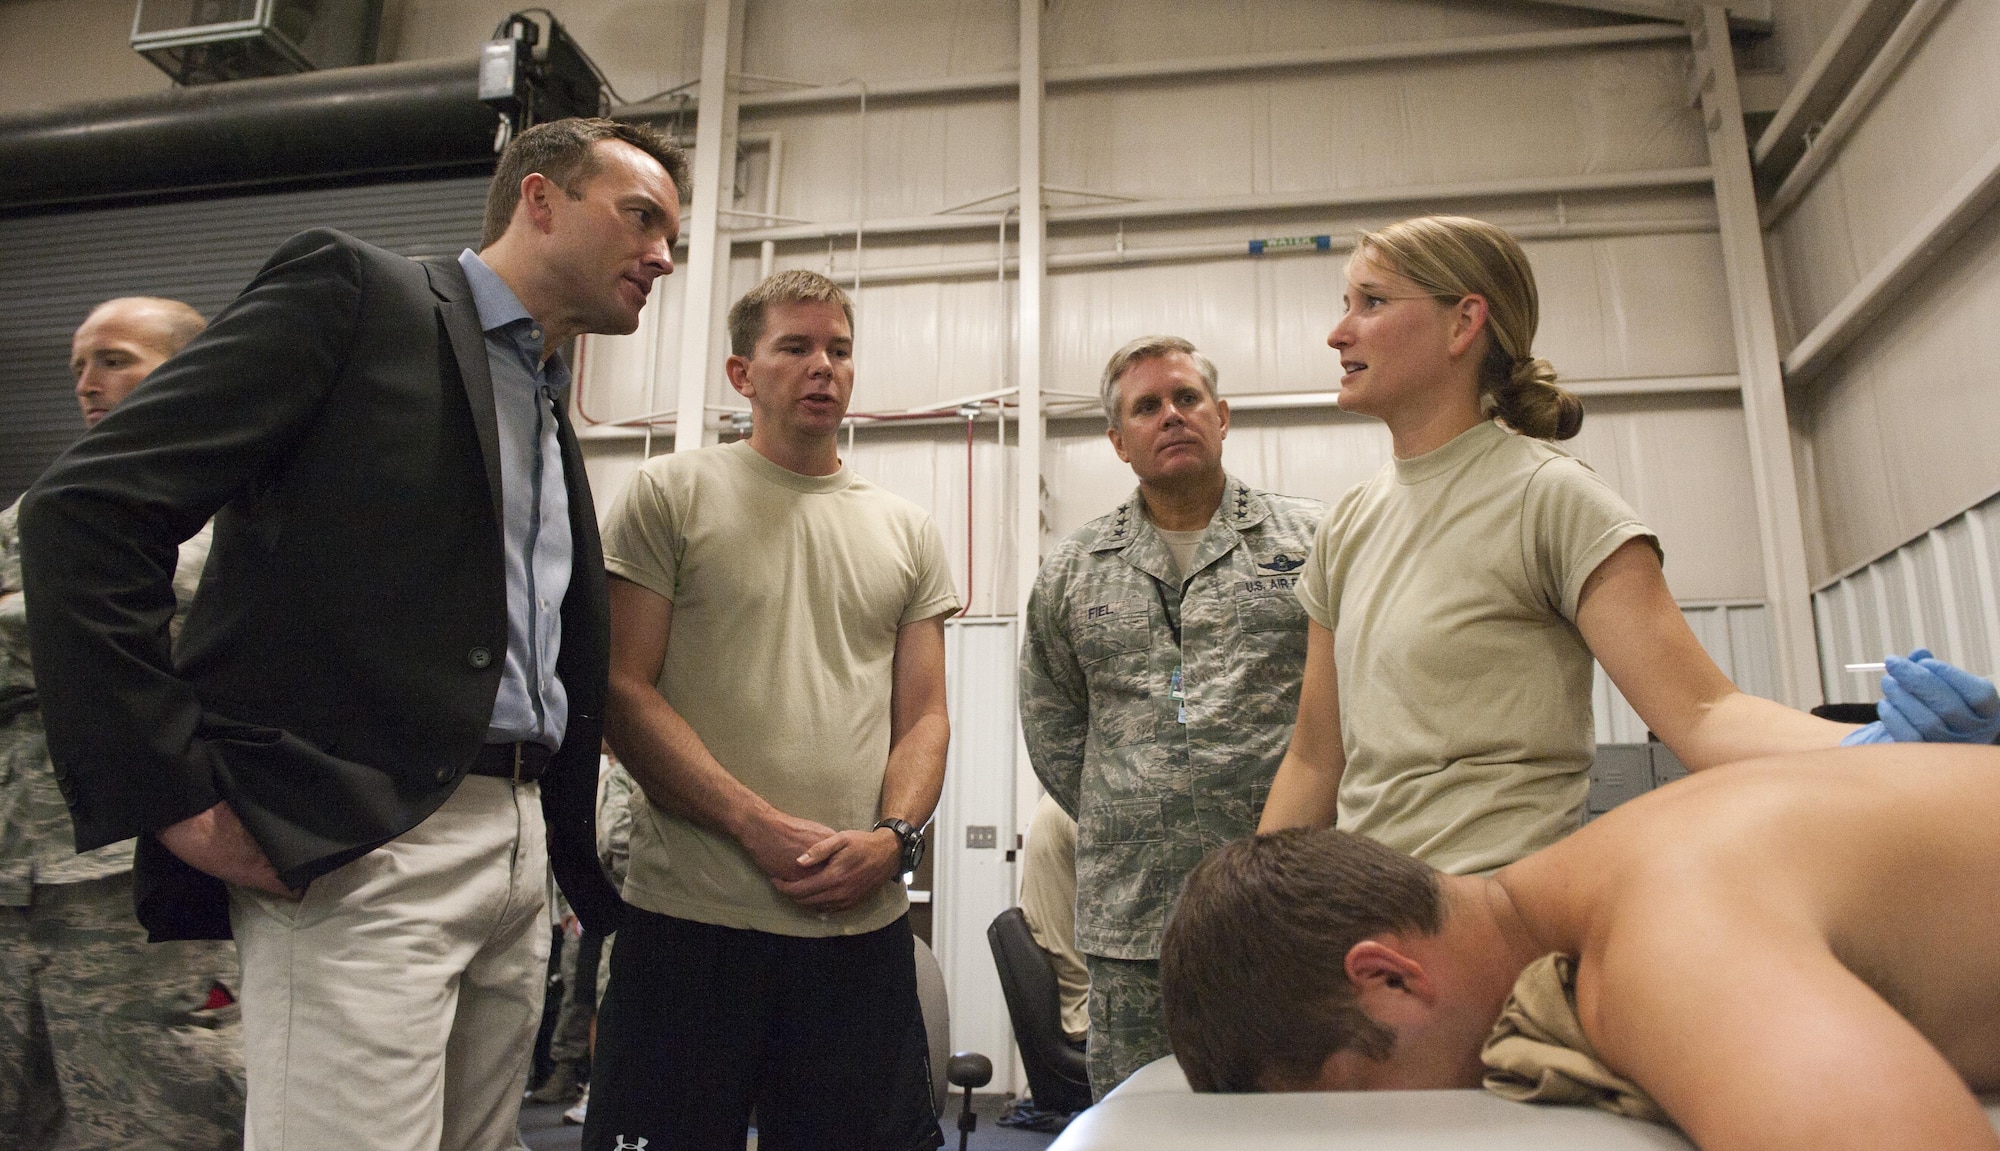 Capt. Danielle Schnitker, 23rd Special Tactics Squadron physical therapist, speaks with Acting Secretary of the Air Force Eric Fanning about physical therapy treatment at Hurlburt Field, Fla., Sept. 10, 2013. This is Fanning’s first visit to the area since he assumed office June 21, 2013. 
